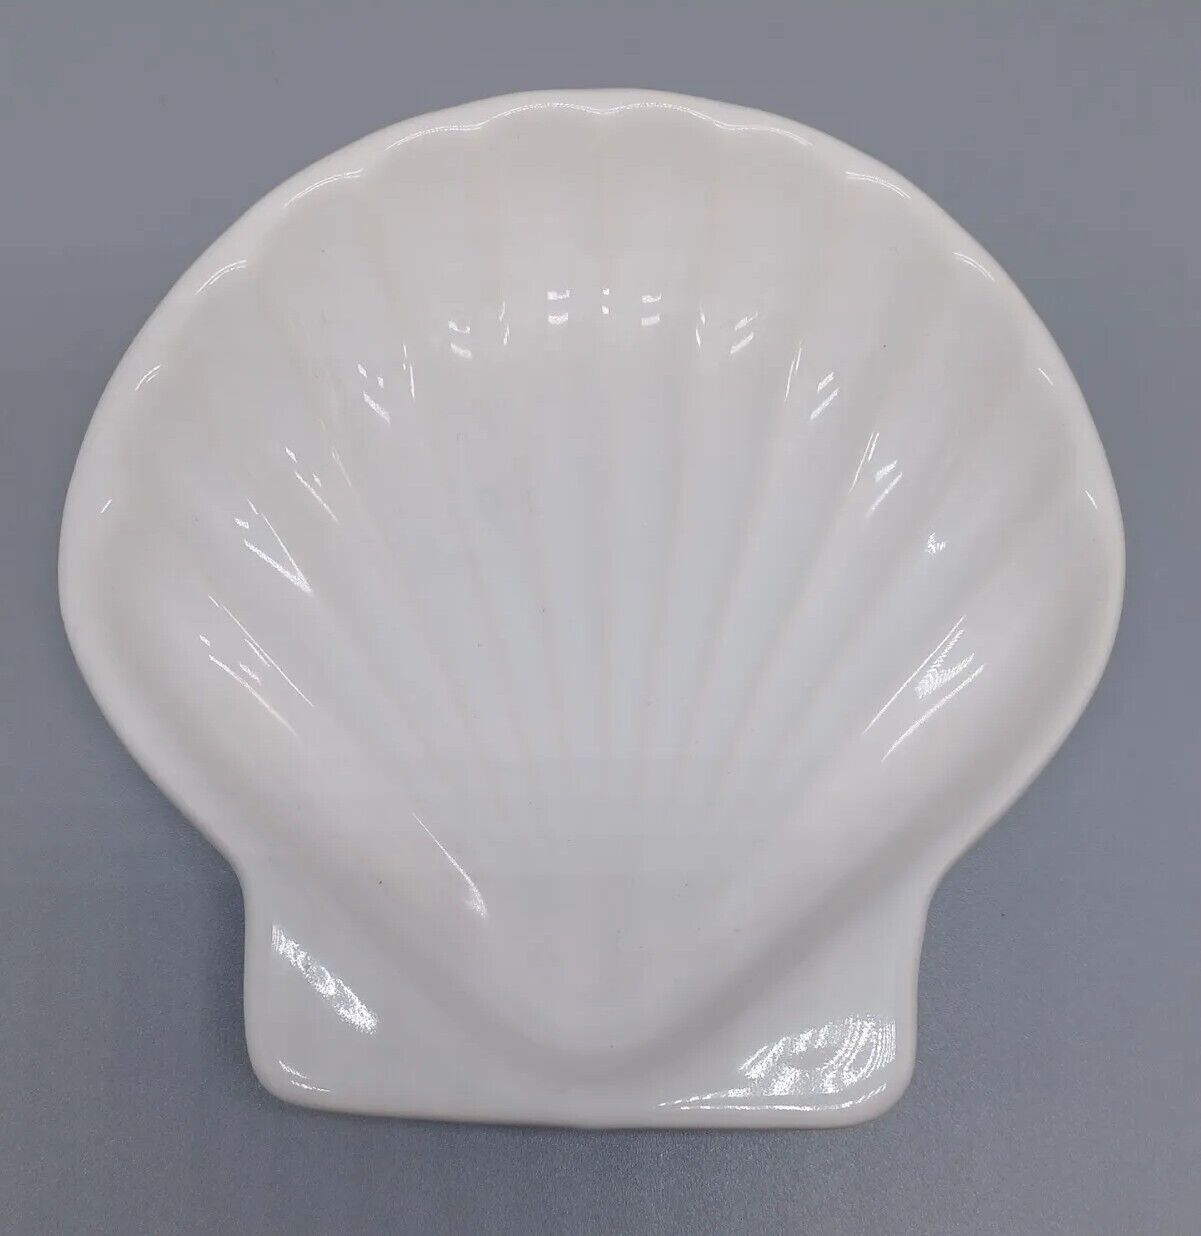 Vintage American Airlines White Shell Soap Dish Pre Owned (Approx. 5” Wide) 